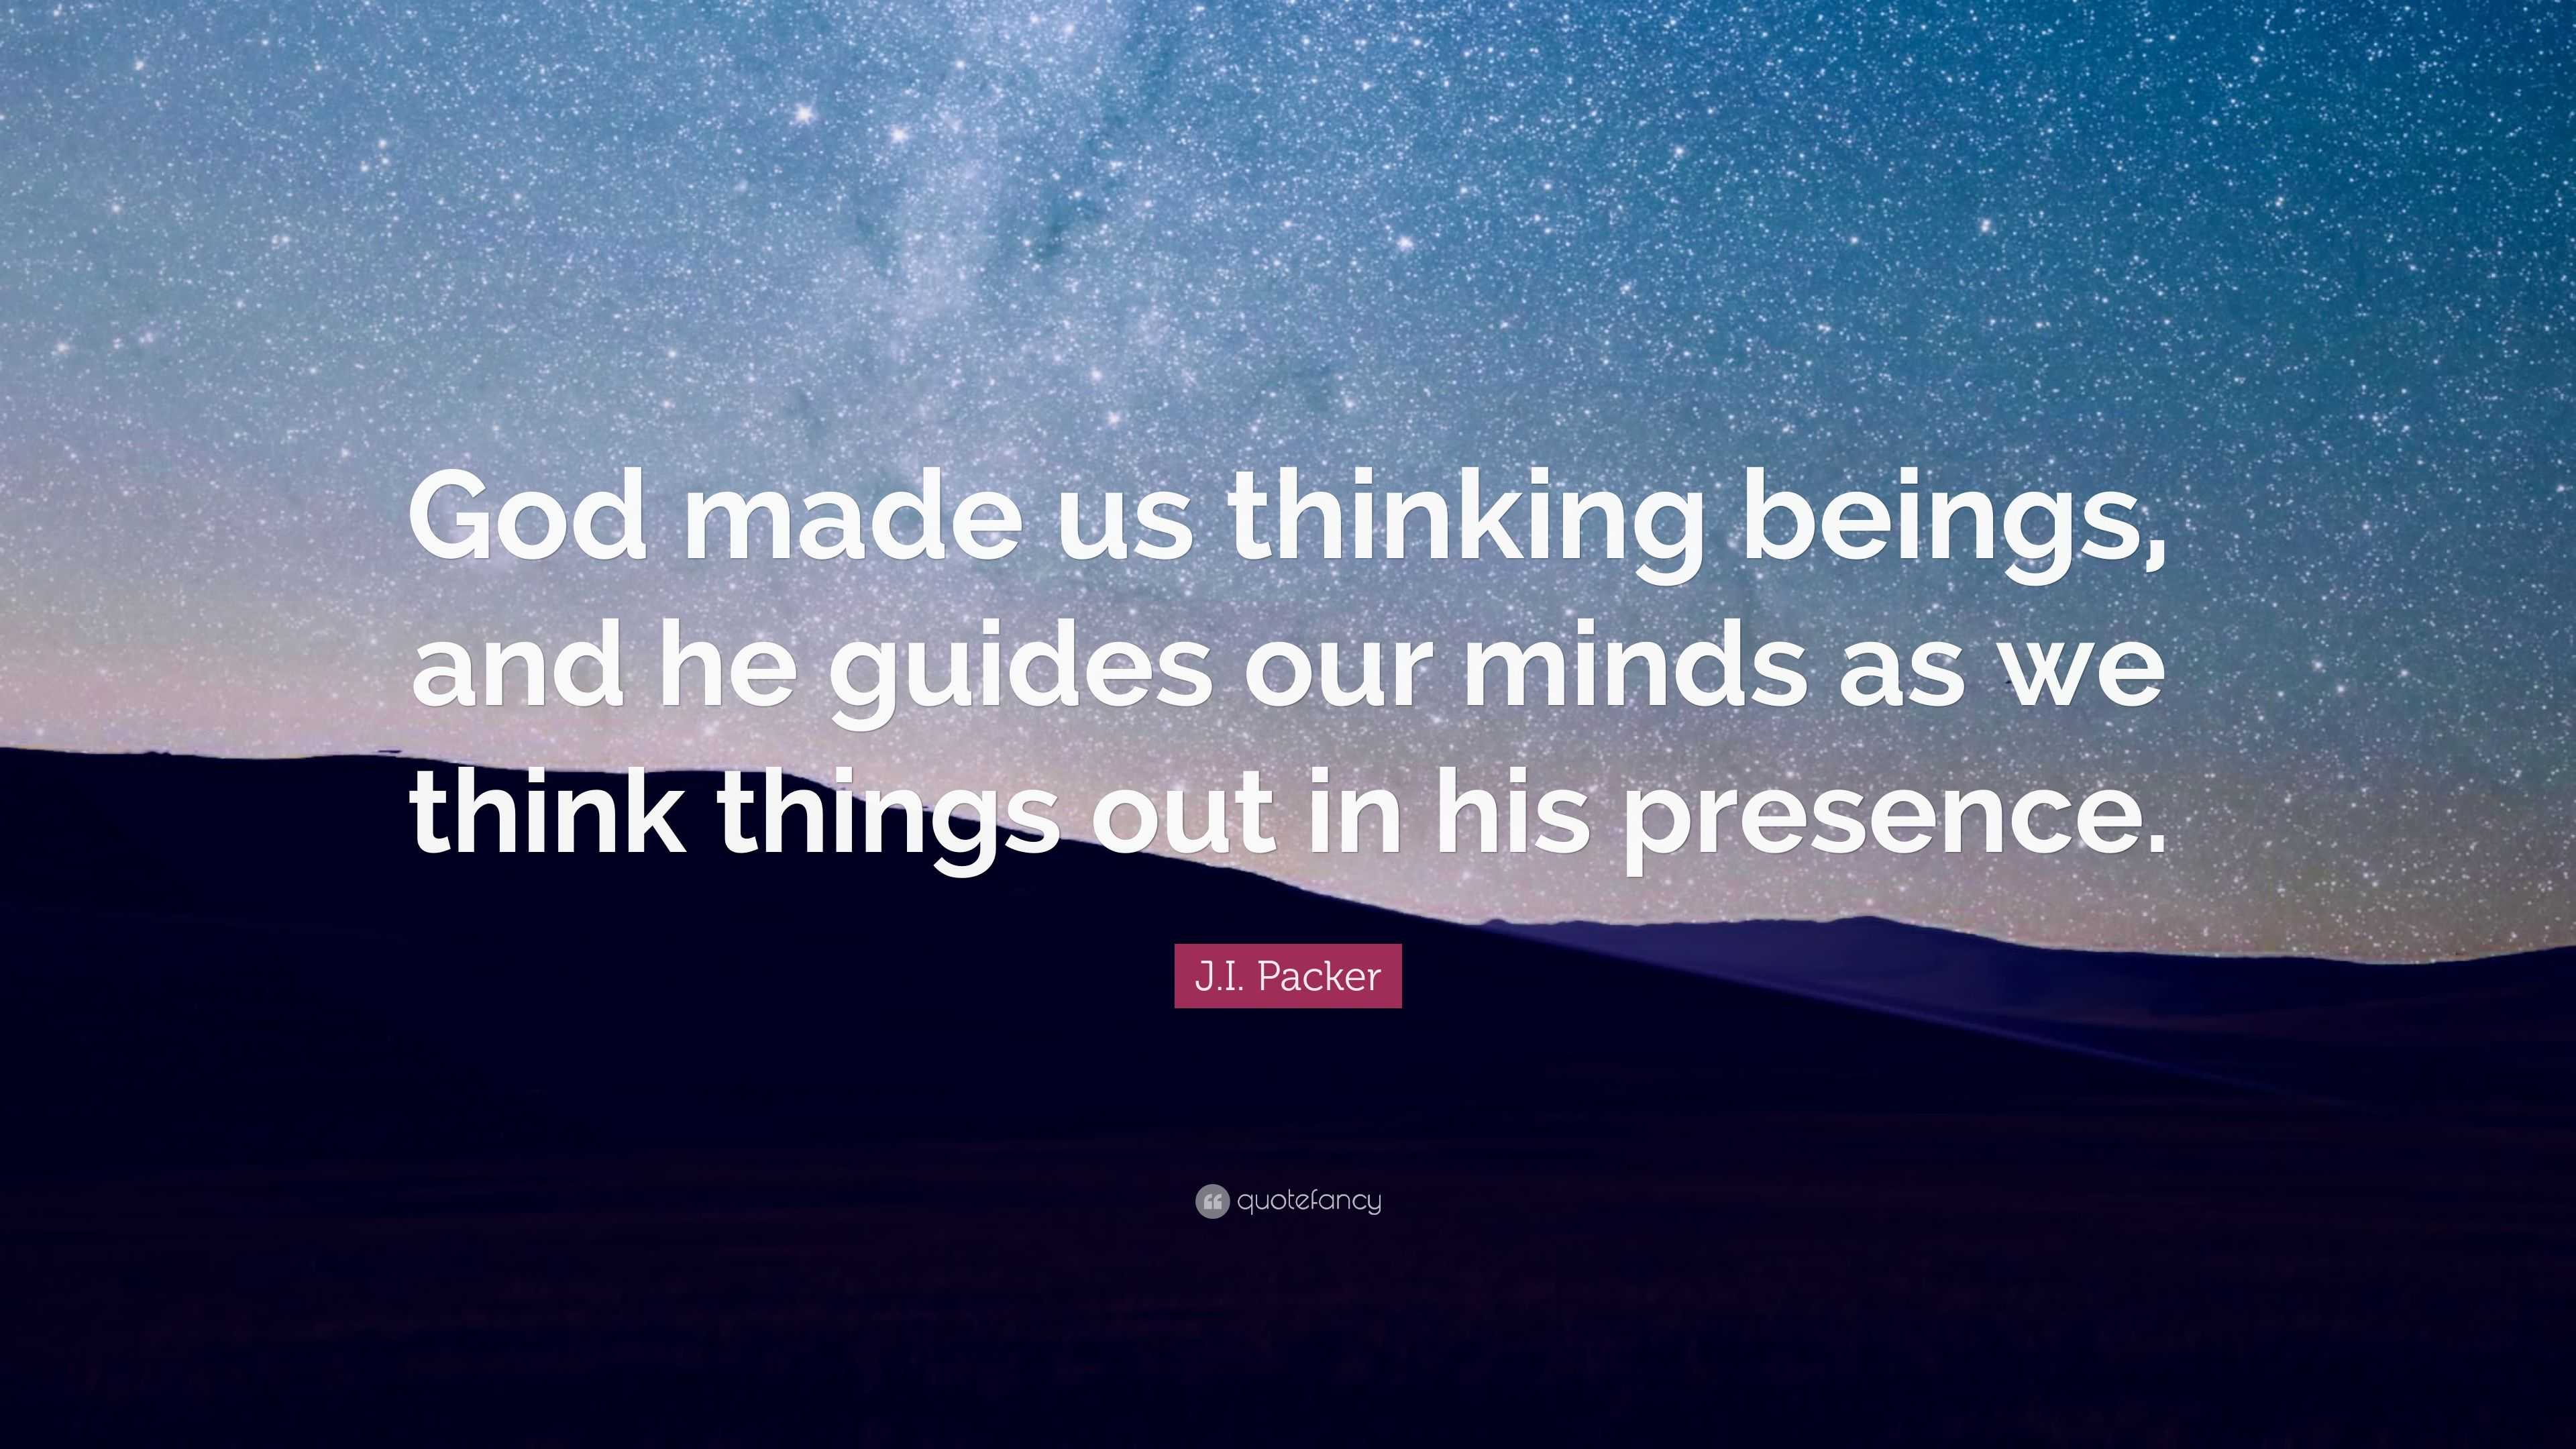 J.I. Packer Quote “God made us thinking beings, and he guides our